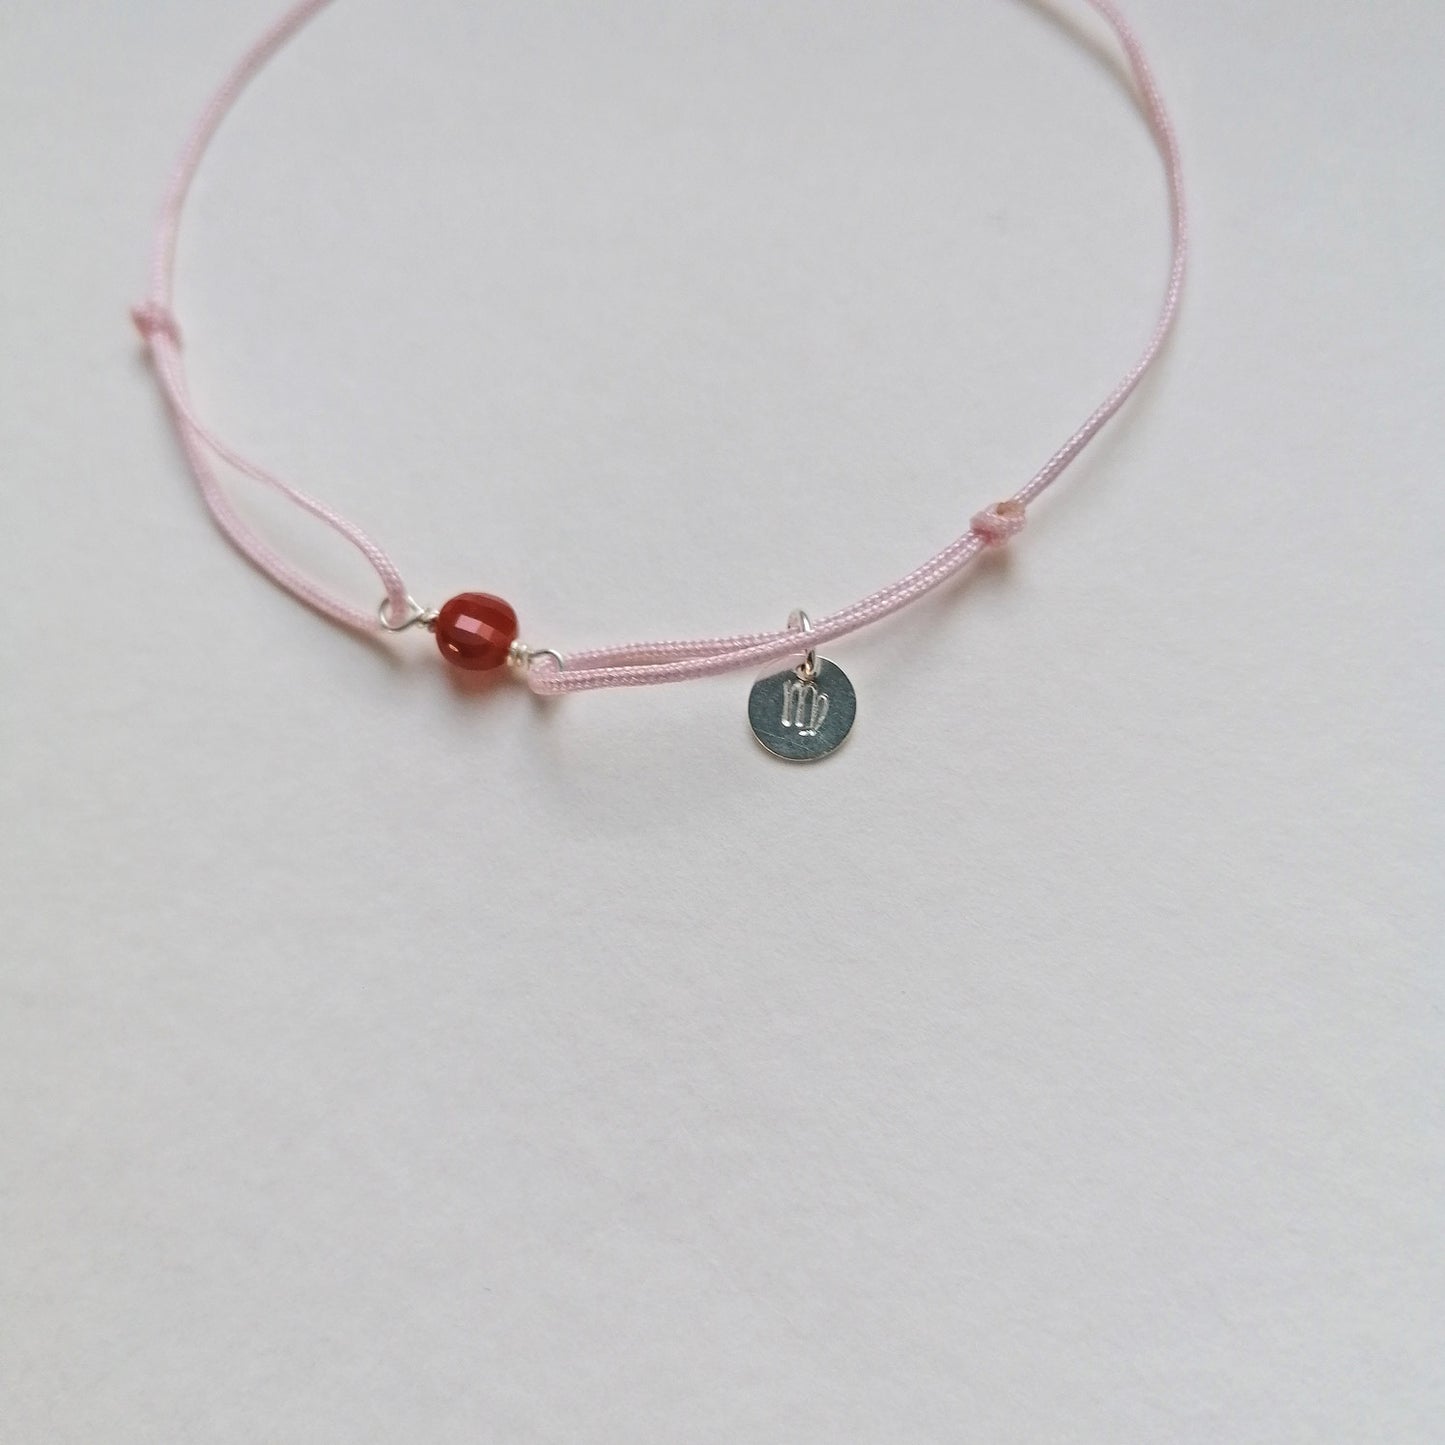 Initial & Sternzeichen Armband rosa | Roter Karneol Silber | pia norden